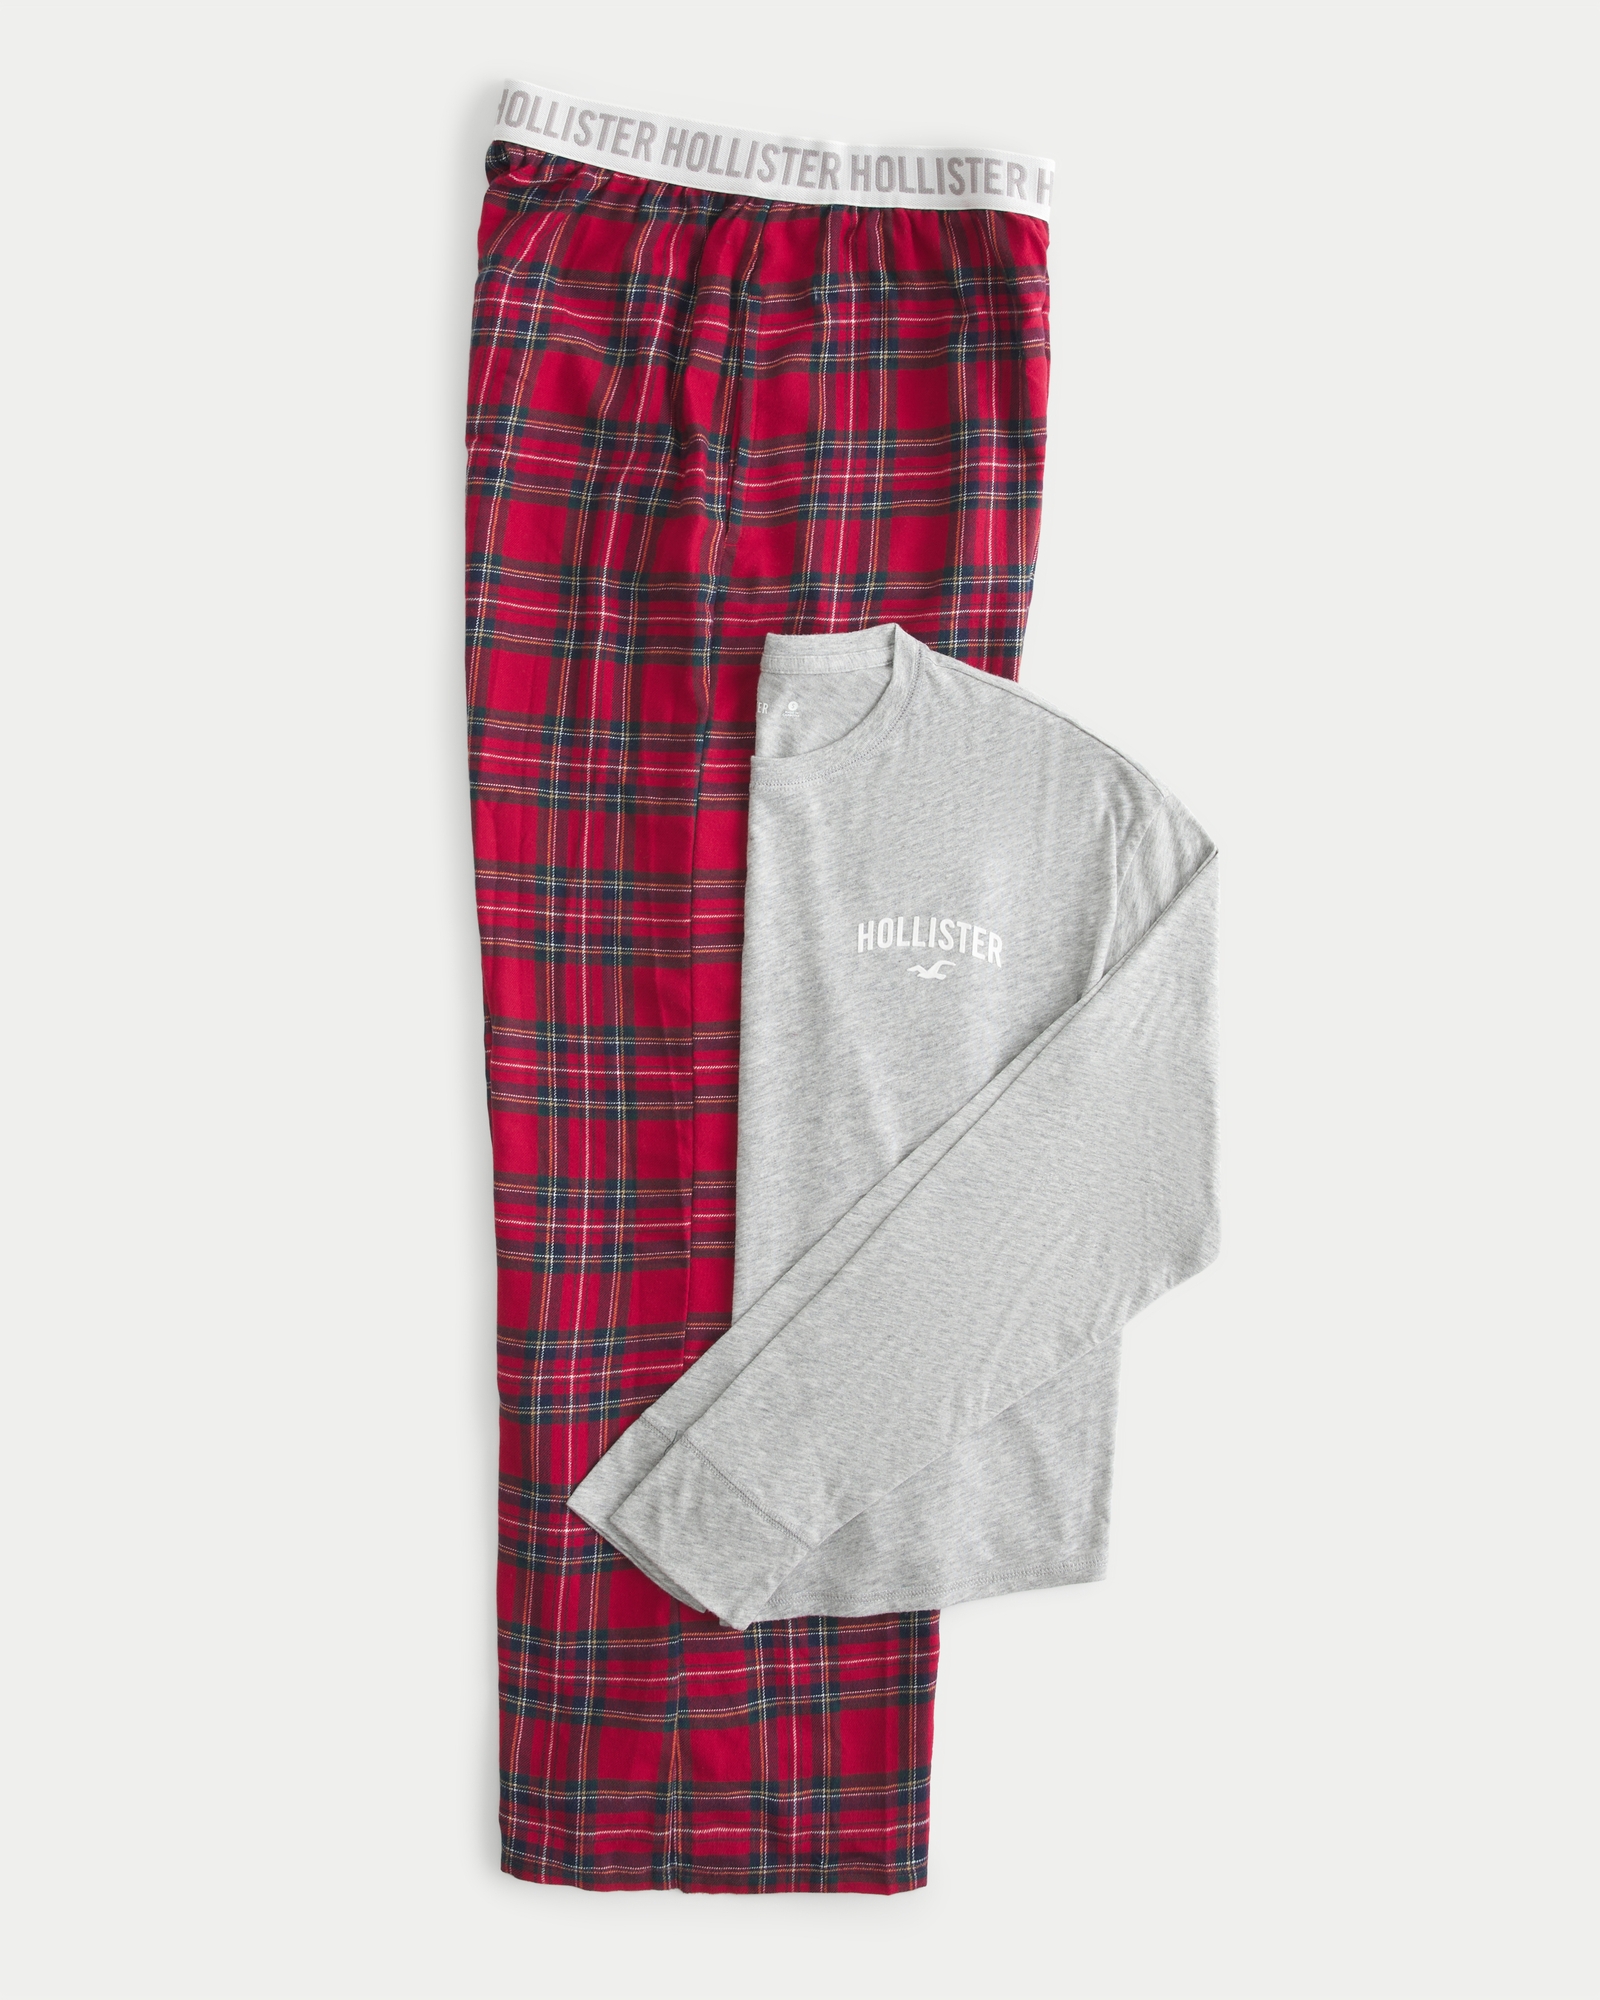 Aerie Flannel Pajama Pant  Clothes, Flannel pajama pants, Clothes for women